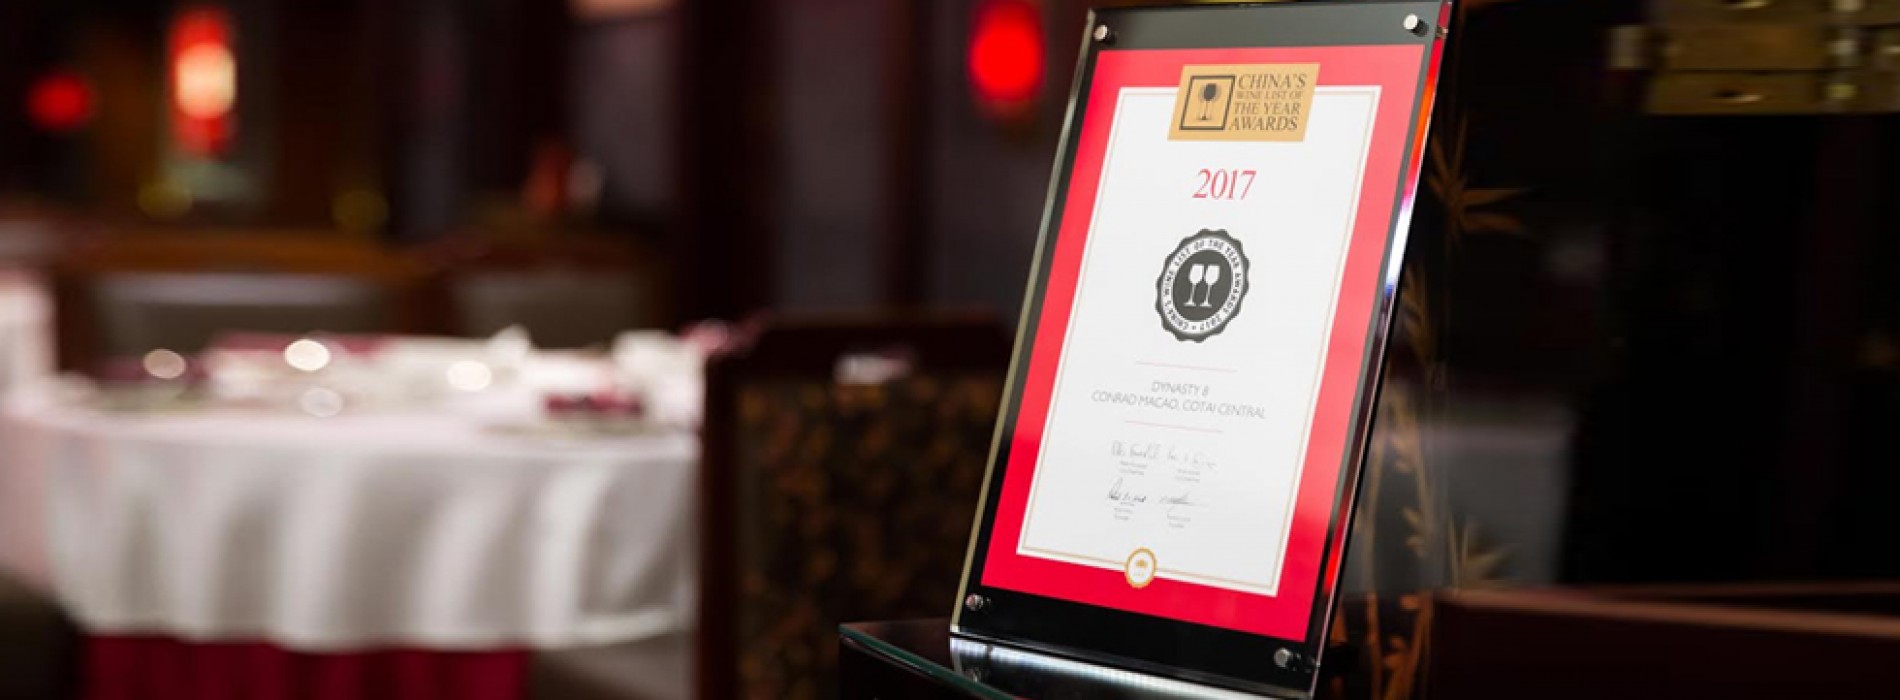 Conrad Macao’s Dynasty 8 Chinese Restaurant recognised with Prestigious Honours at Wine List Awards